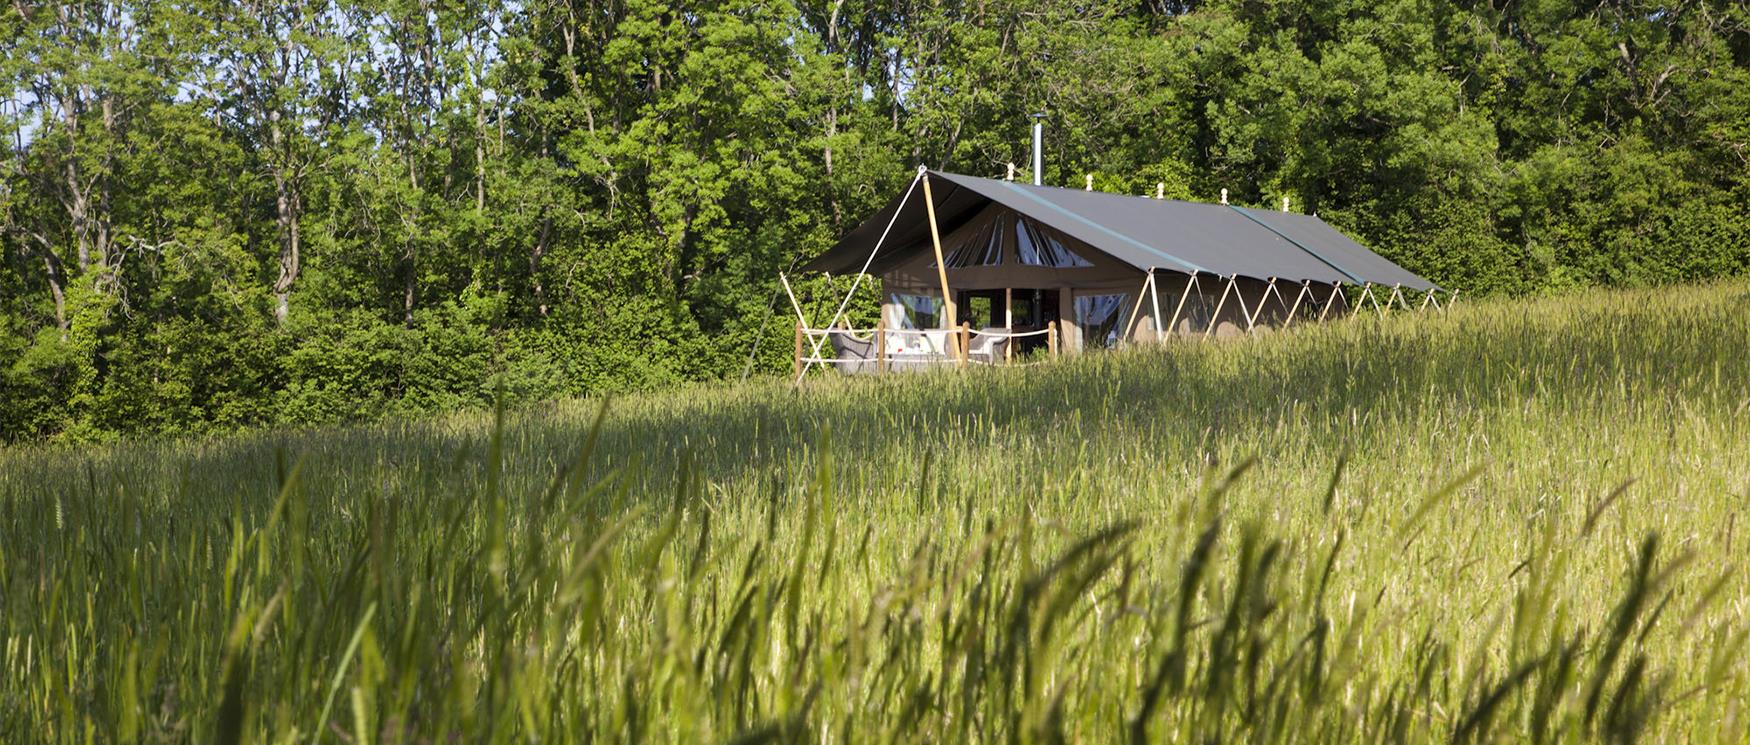 Glamping Sites in Hampshire